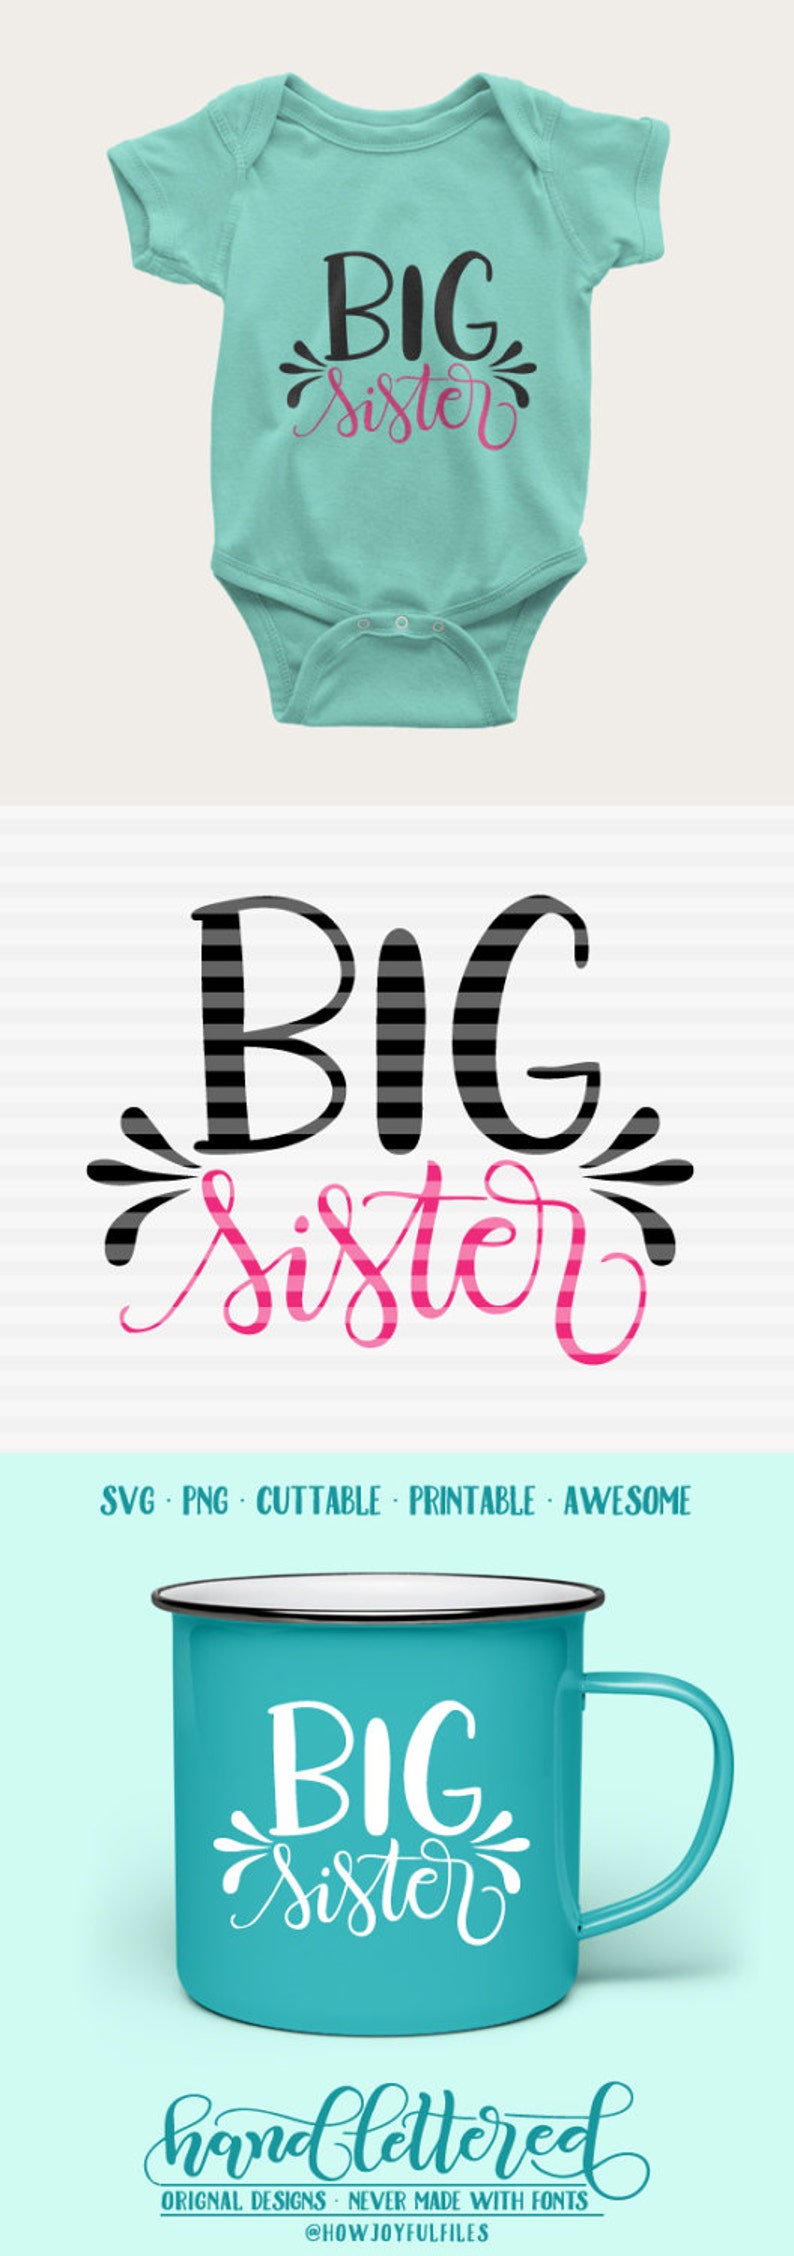 Big sister SVG DXF PDF files hand drawn lettered cut file graphic overlay 23f image 1